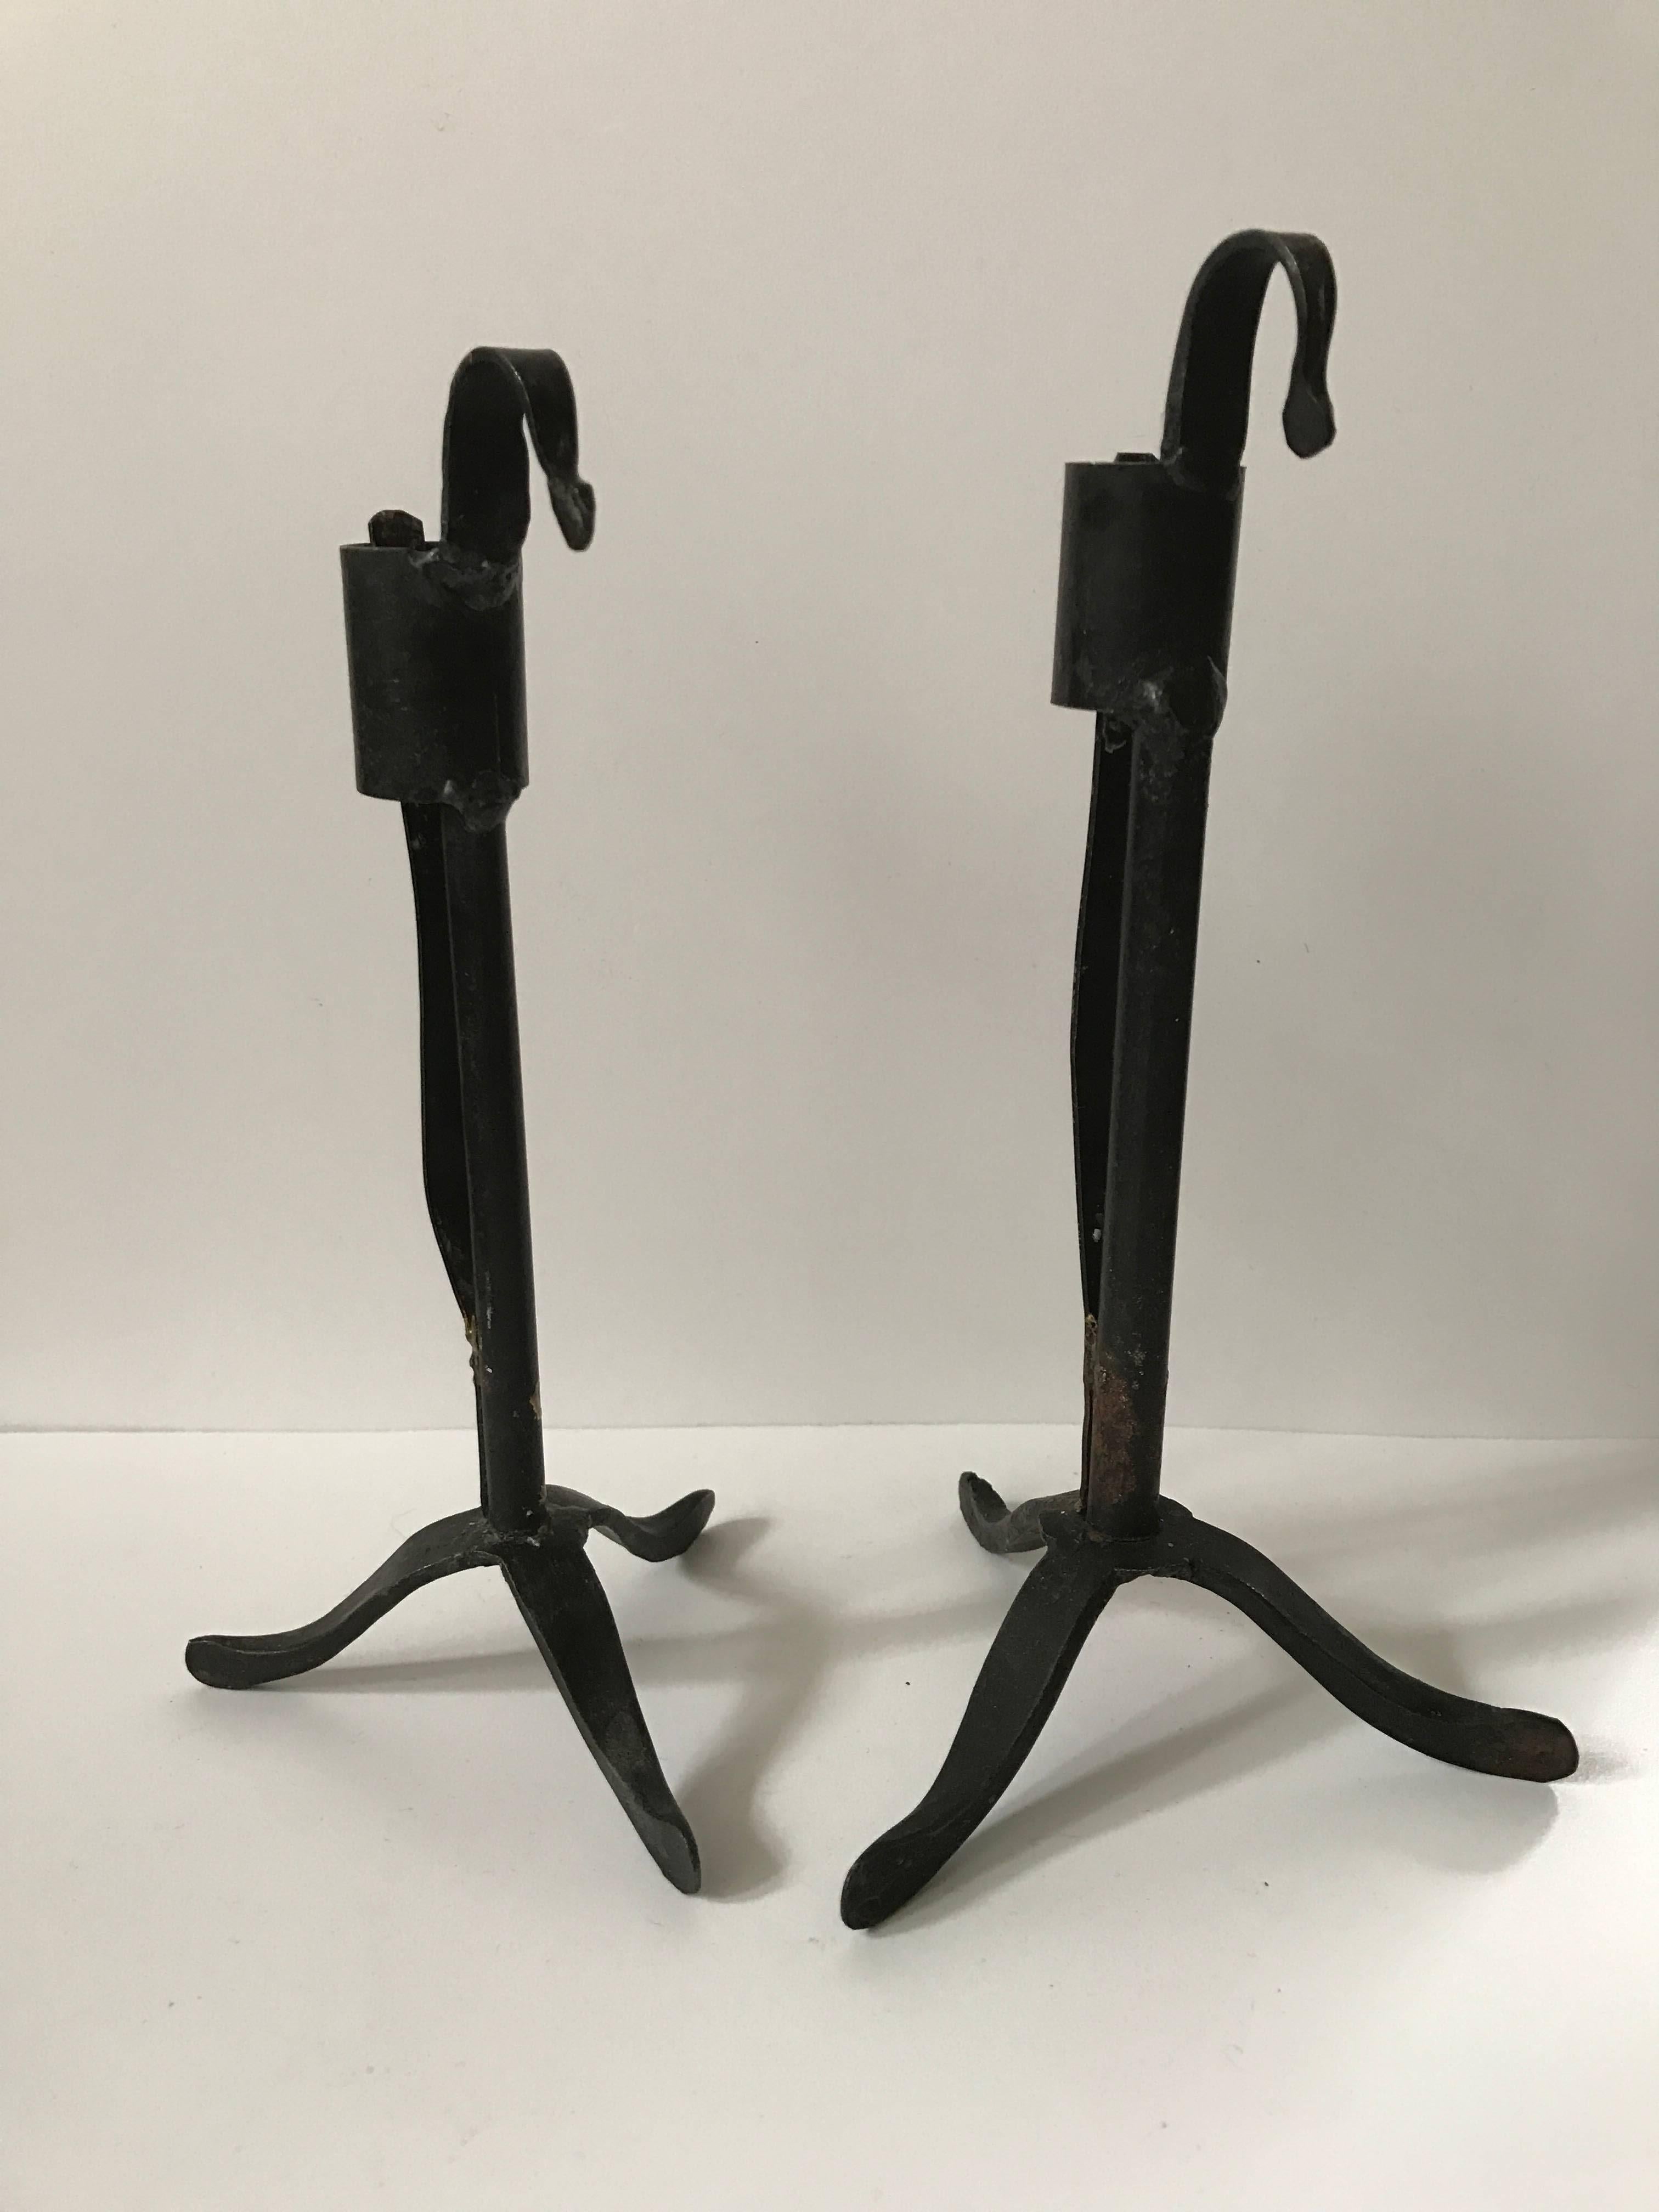 A nice pair of Swedish wrought iron candle sticks, made in the late 19th century. They have different heights and the base differs in wideness, otherwise they look the same. The height of the two are 19 and 20 cm.